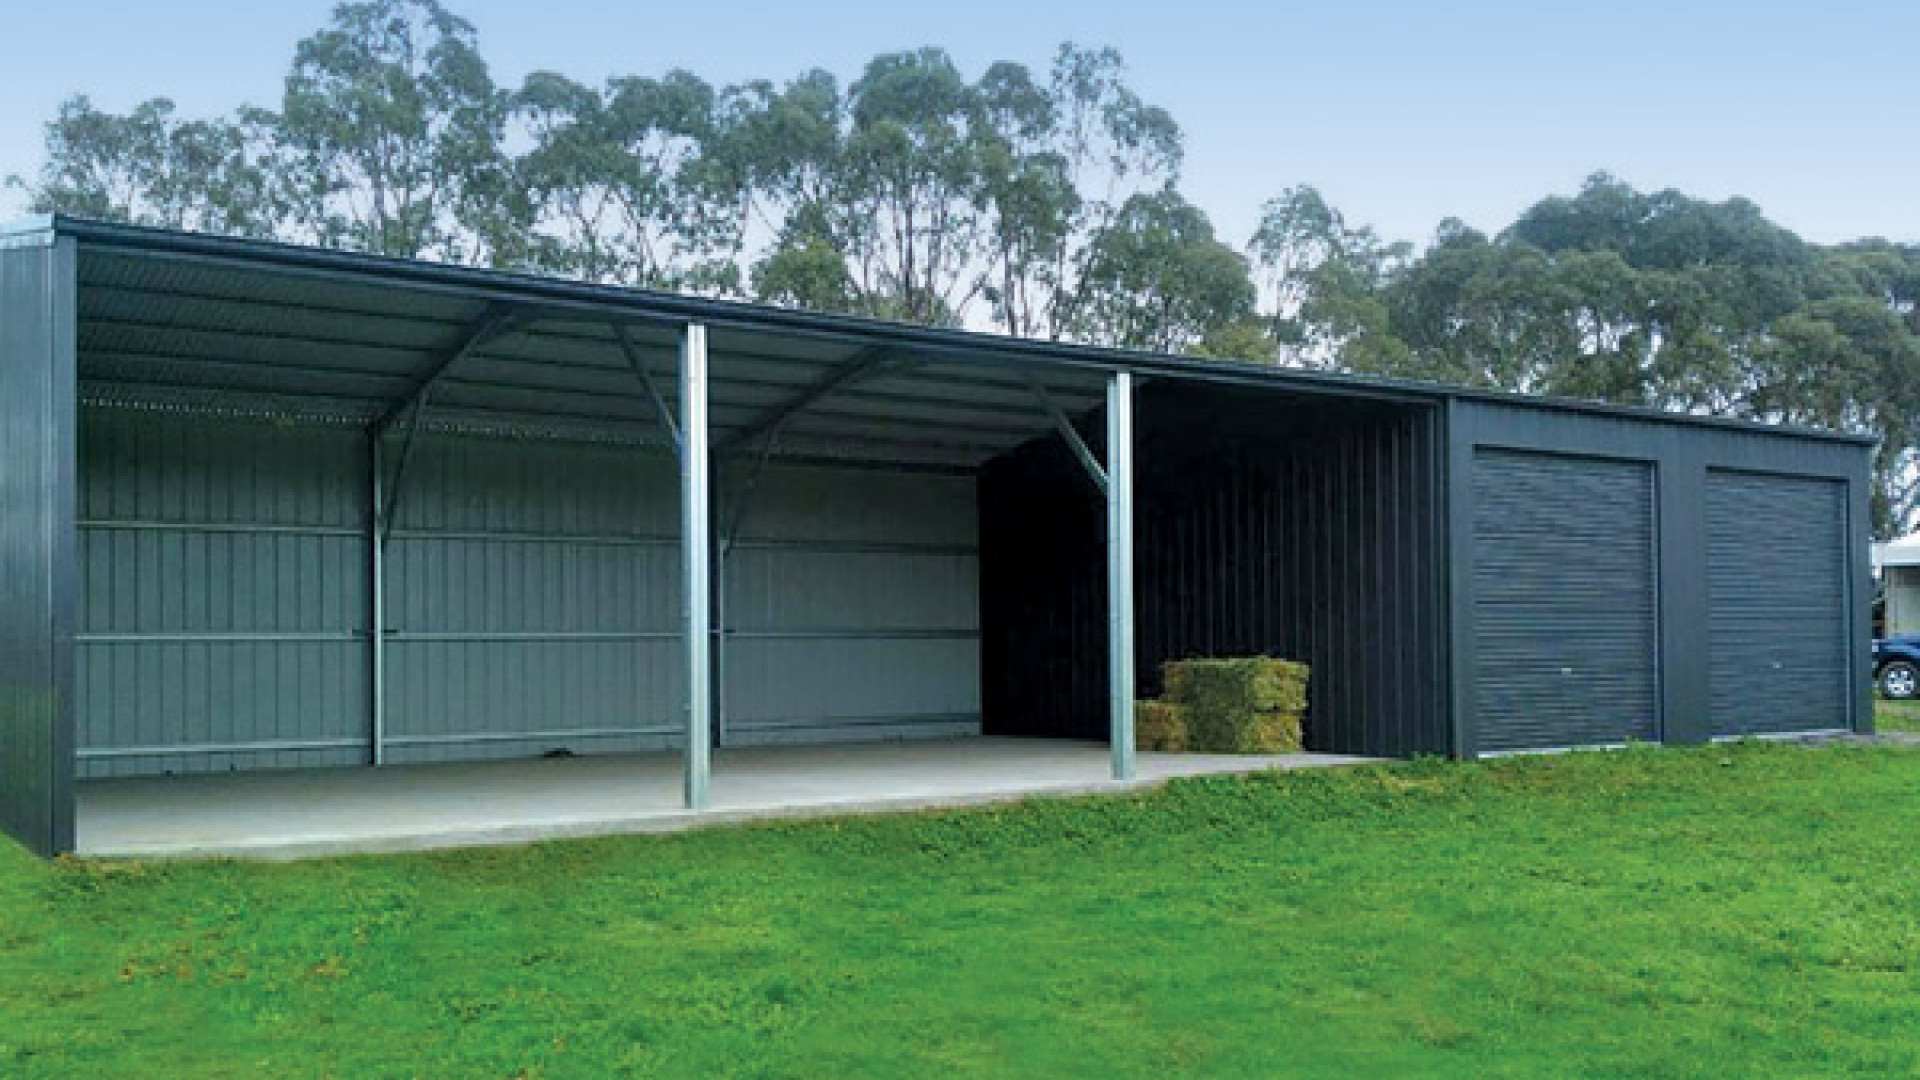 Key Features of an Ideal Farm Shed